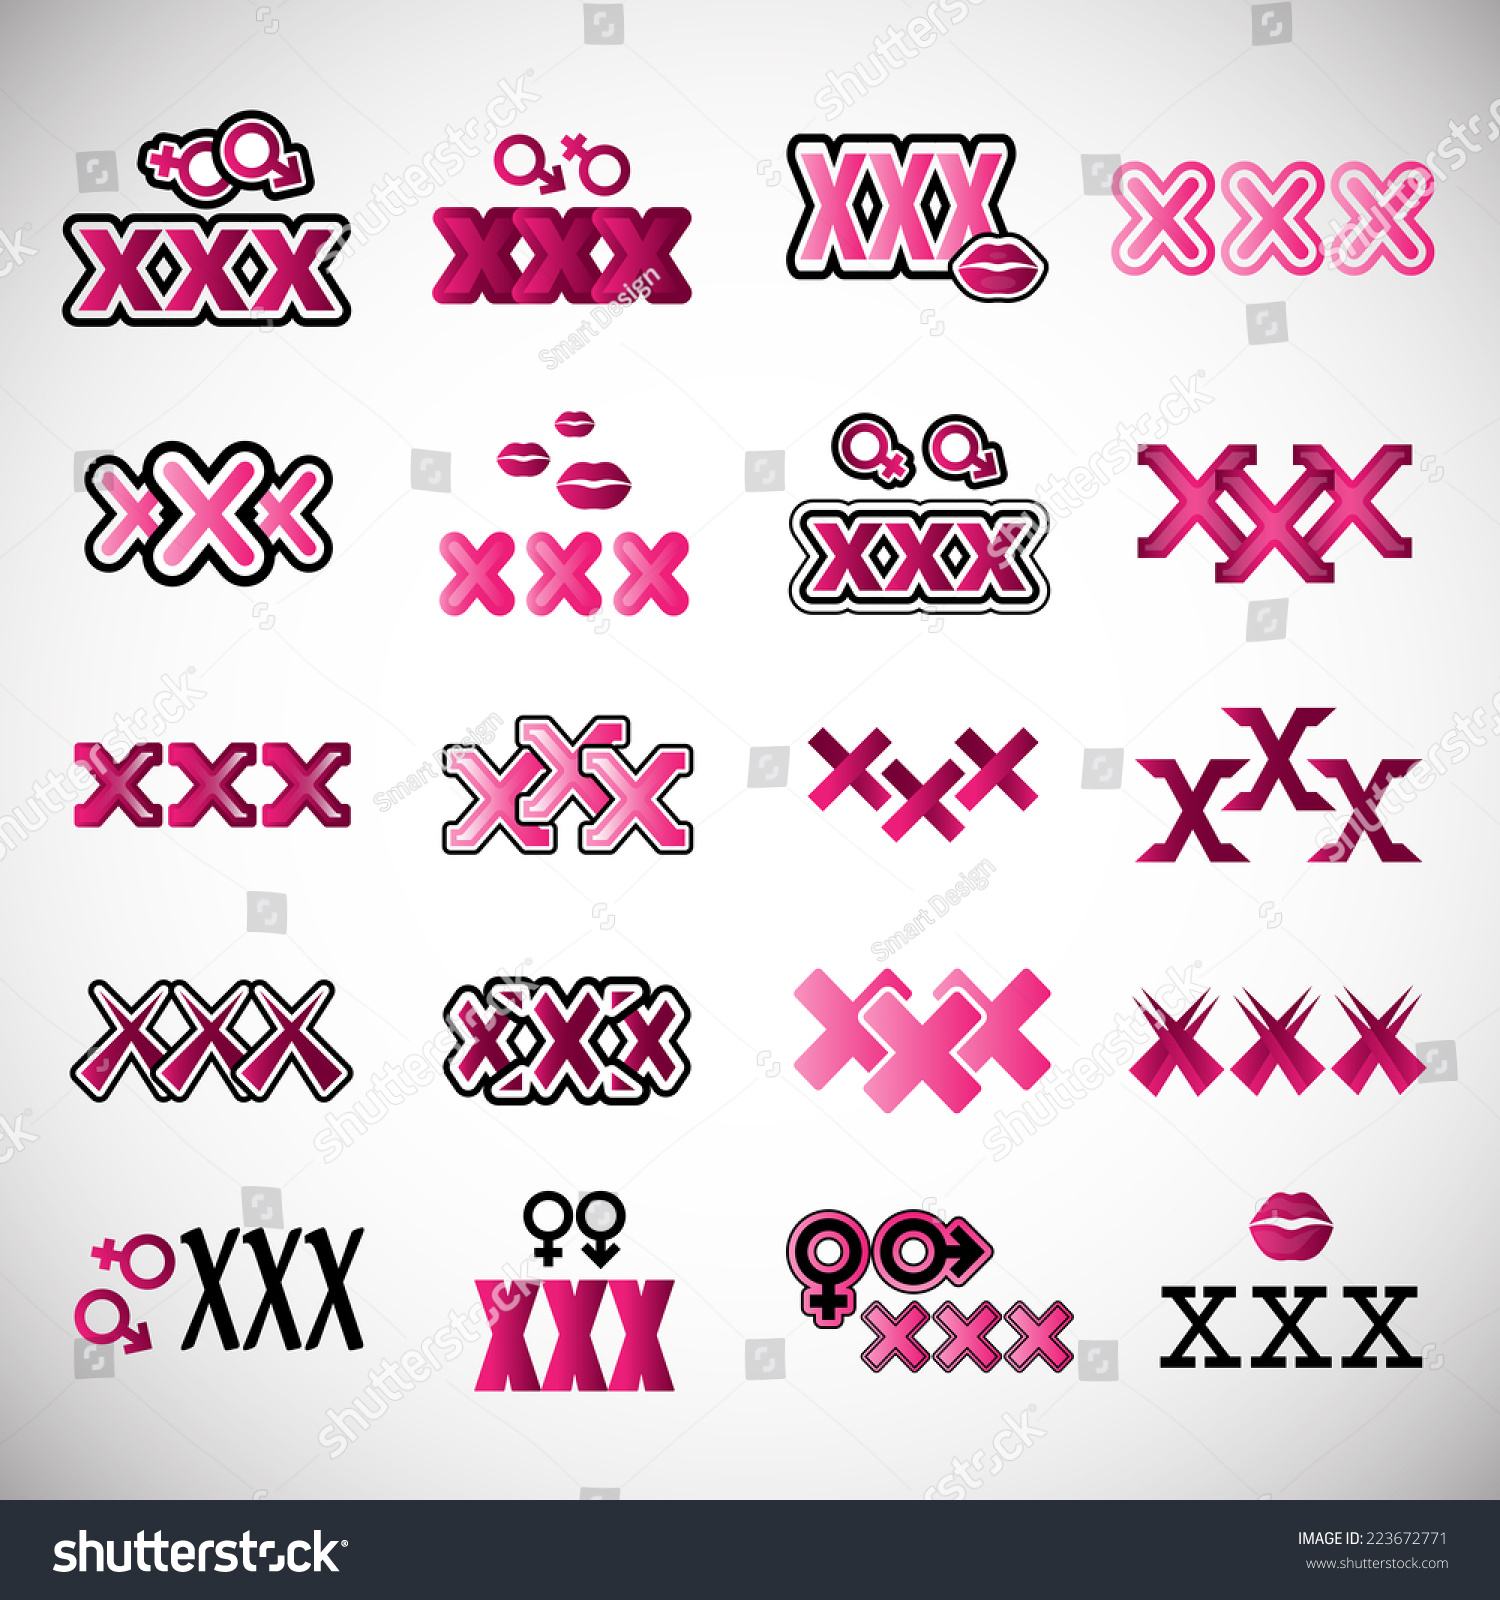 Xxx Icons Set Isolated On Gray Stock Vector Royalty Free 223672771 Shutterstock 2749